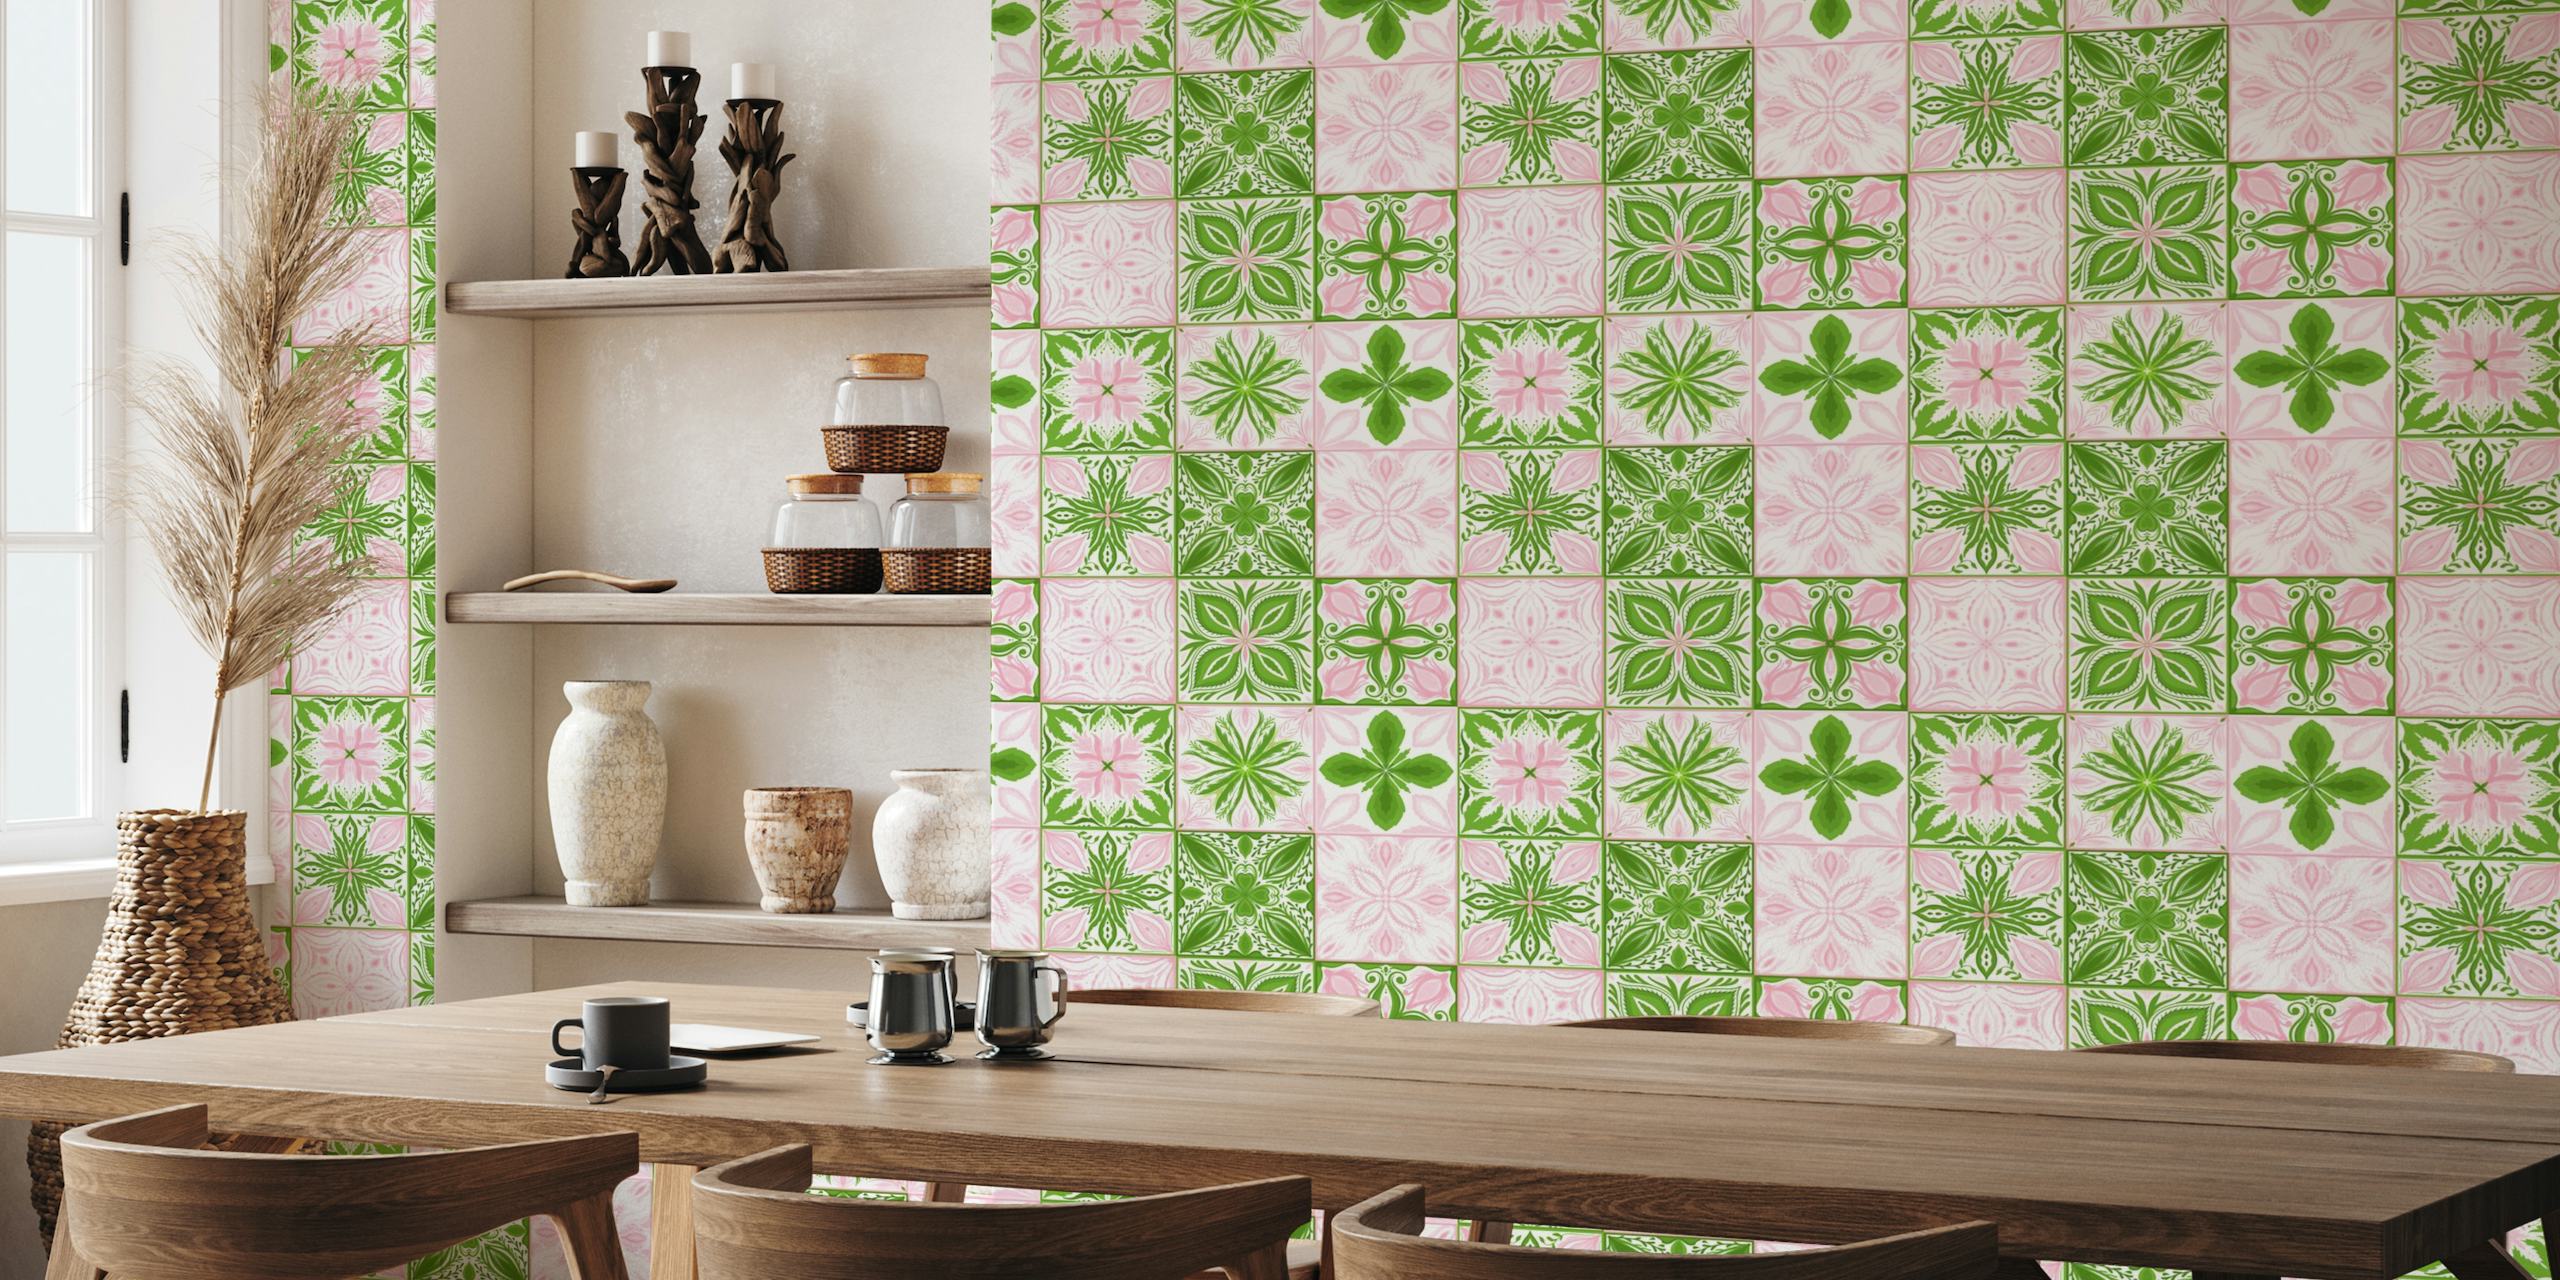 Ornate tiles in pink and green papiers peint